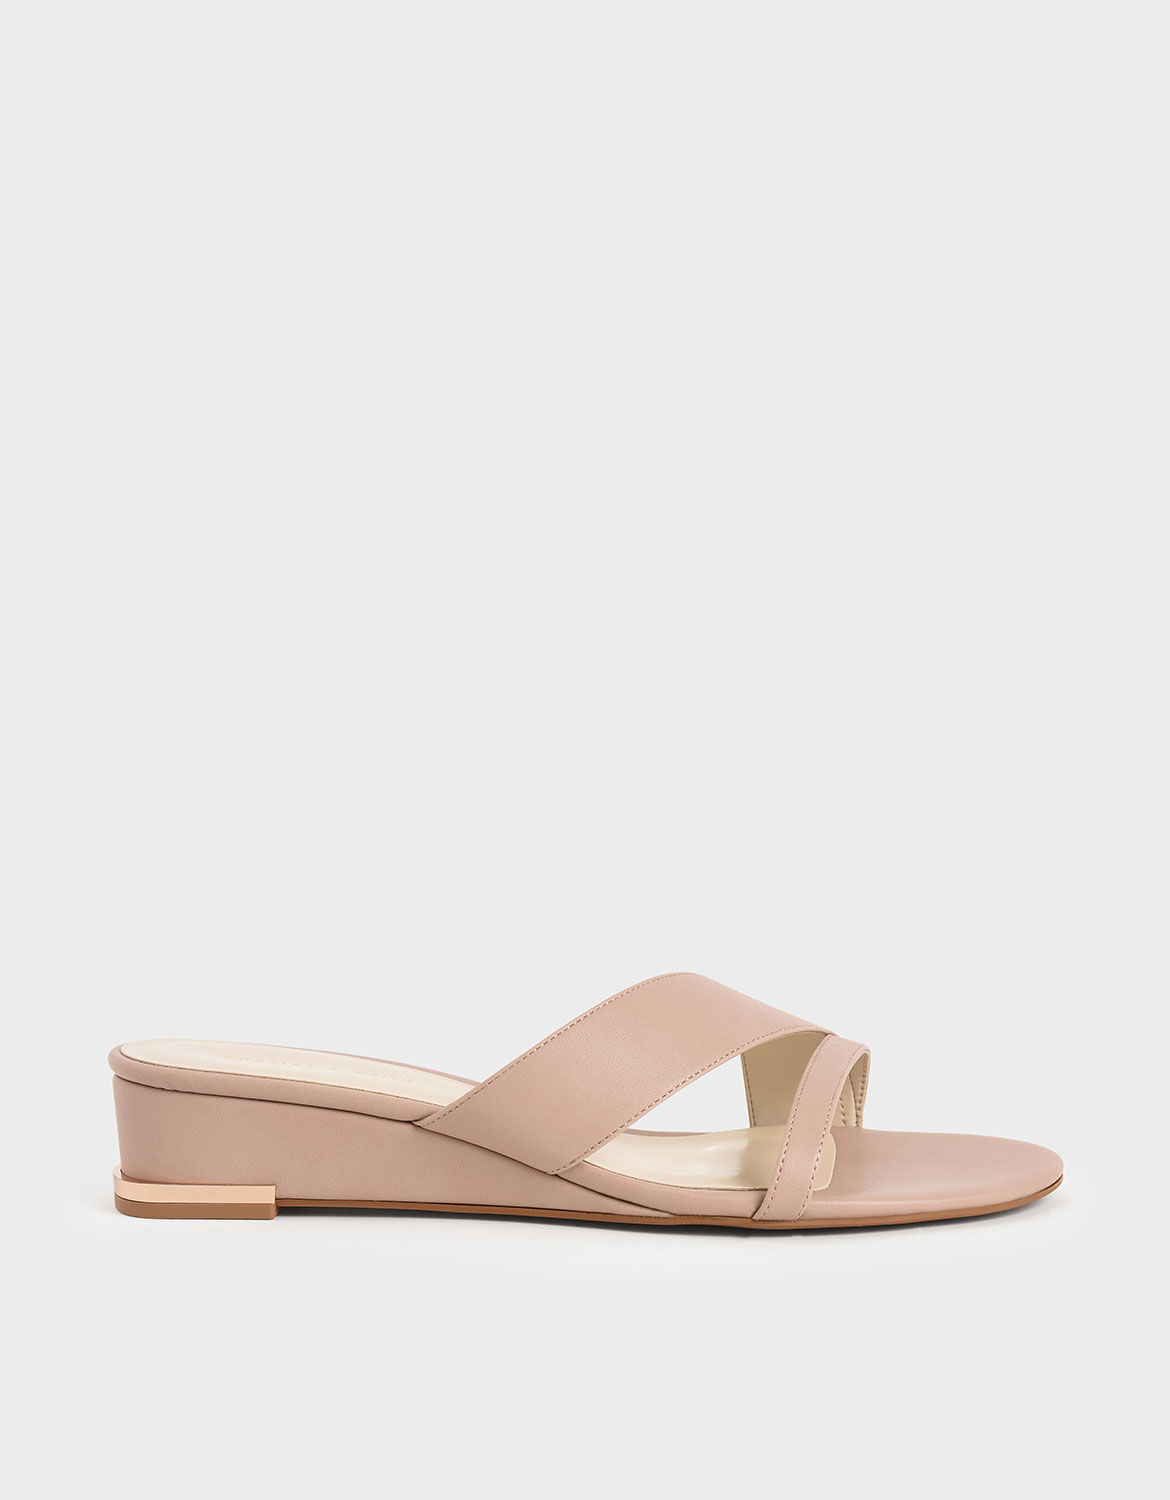 nude pointed wedges